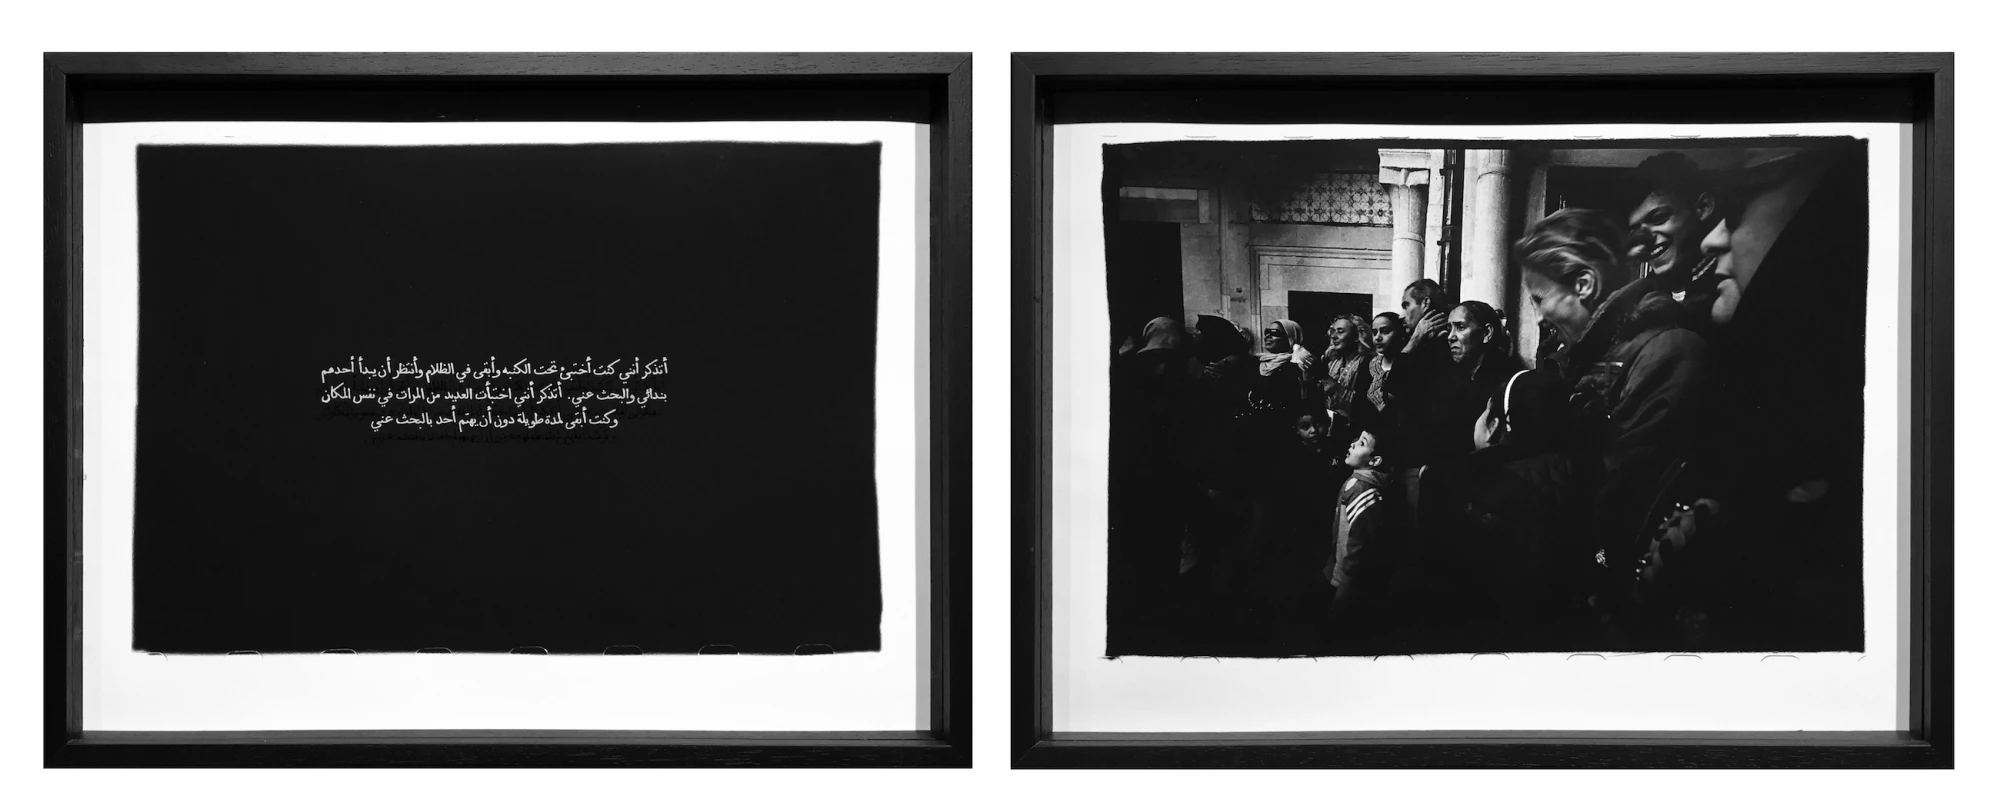 About the Artwork Nicène Kossentini Sequence No. Vii, 2019 Silver Gelatin Print on Baryta Paper and White Ink on Glass 30h X 40w Cm Each (2 Photo Grams)  by Nicène Kossentini